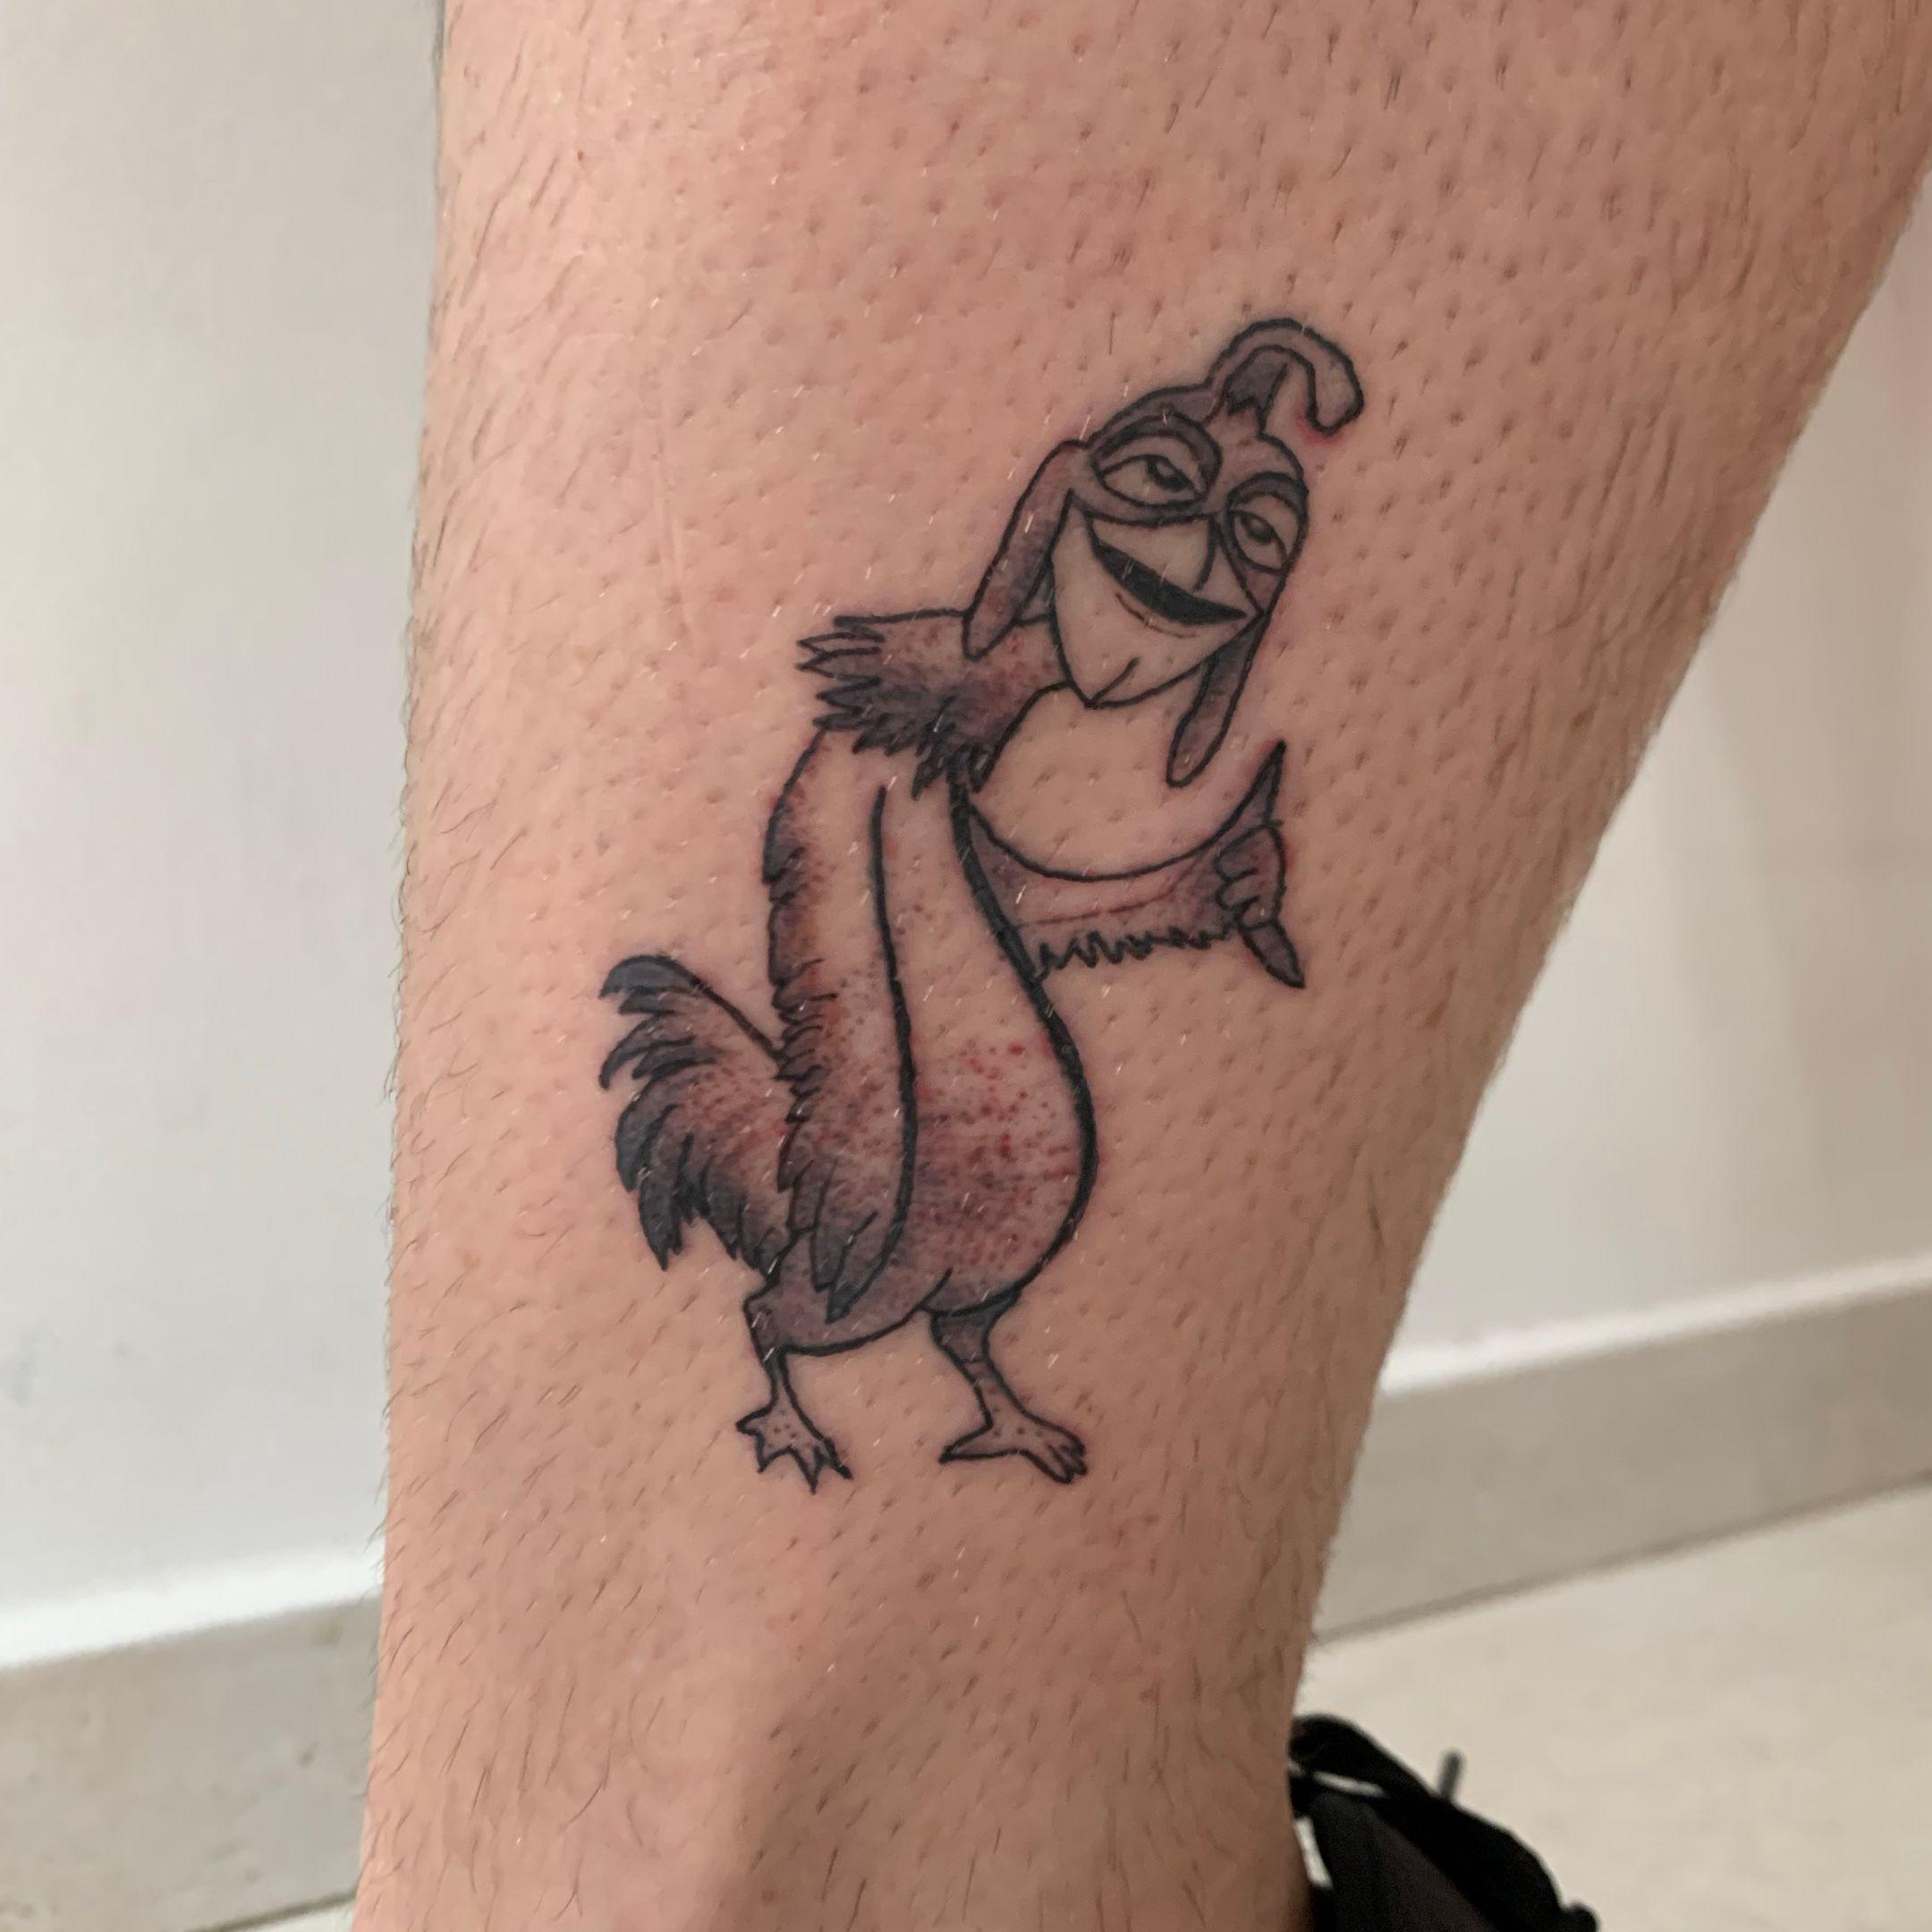 Chicken Joe from Surfs Up tattooed on the upper arm